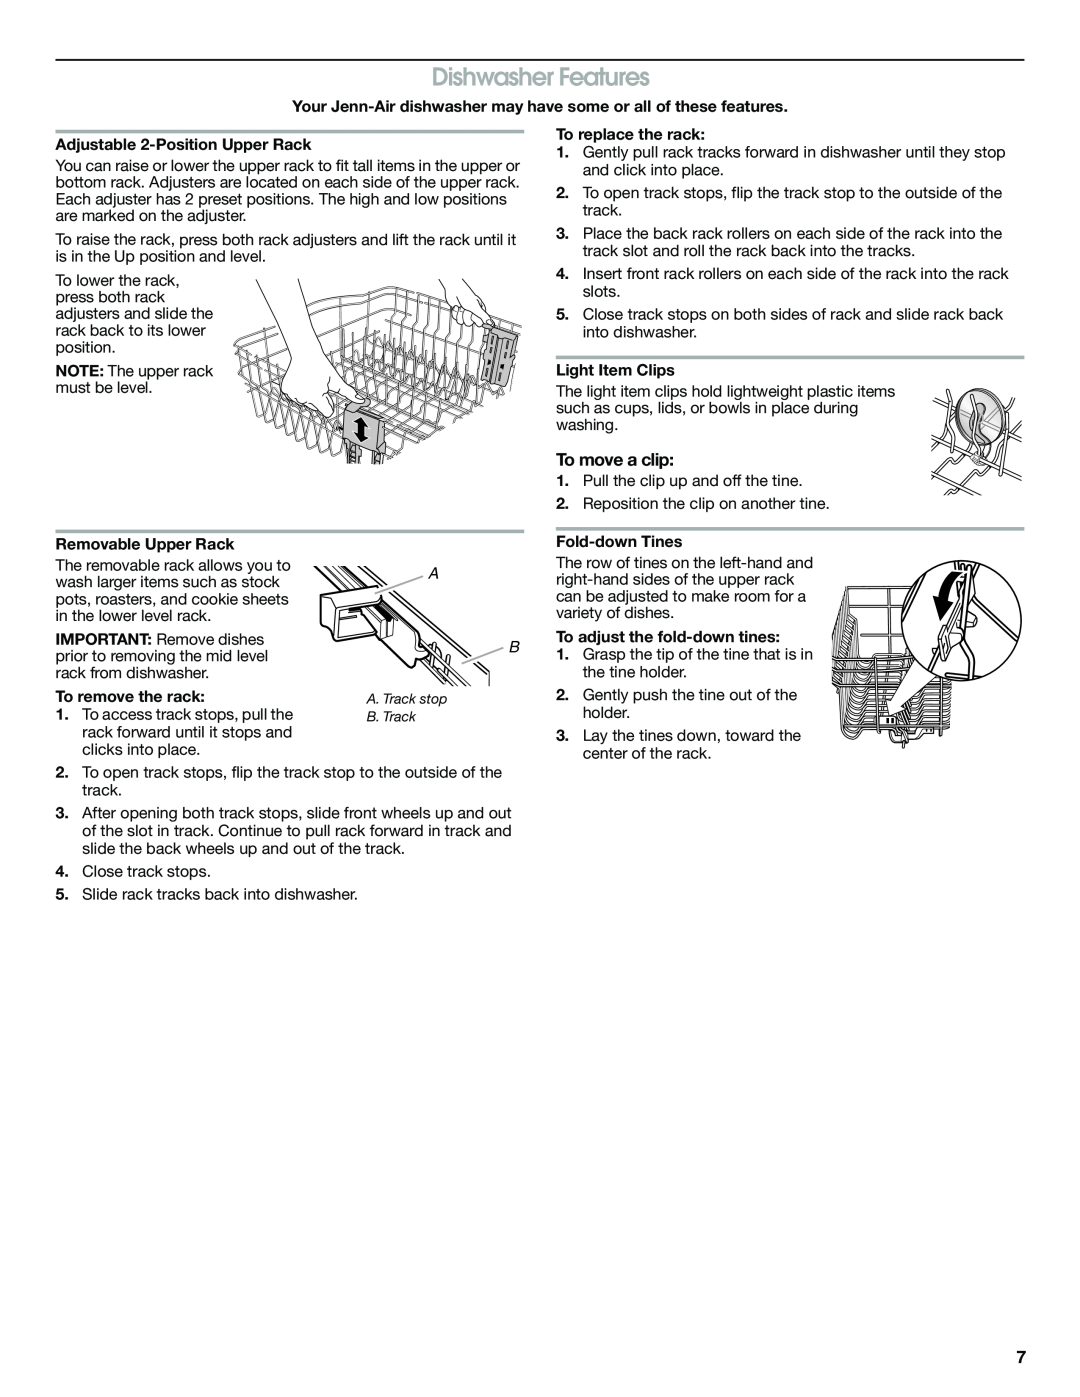 Jenn-Air W10300216A warranty Dishwasher Features, To move a clip 